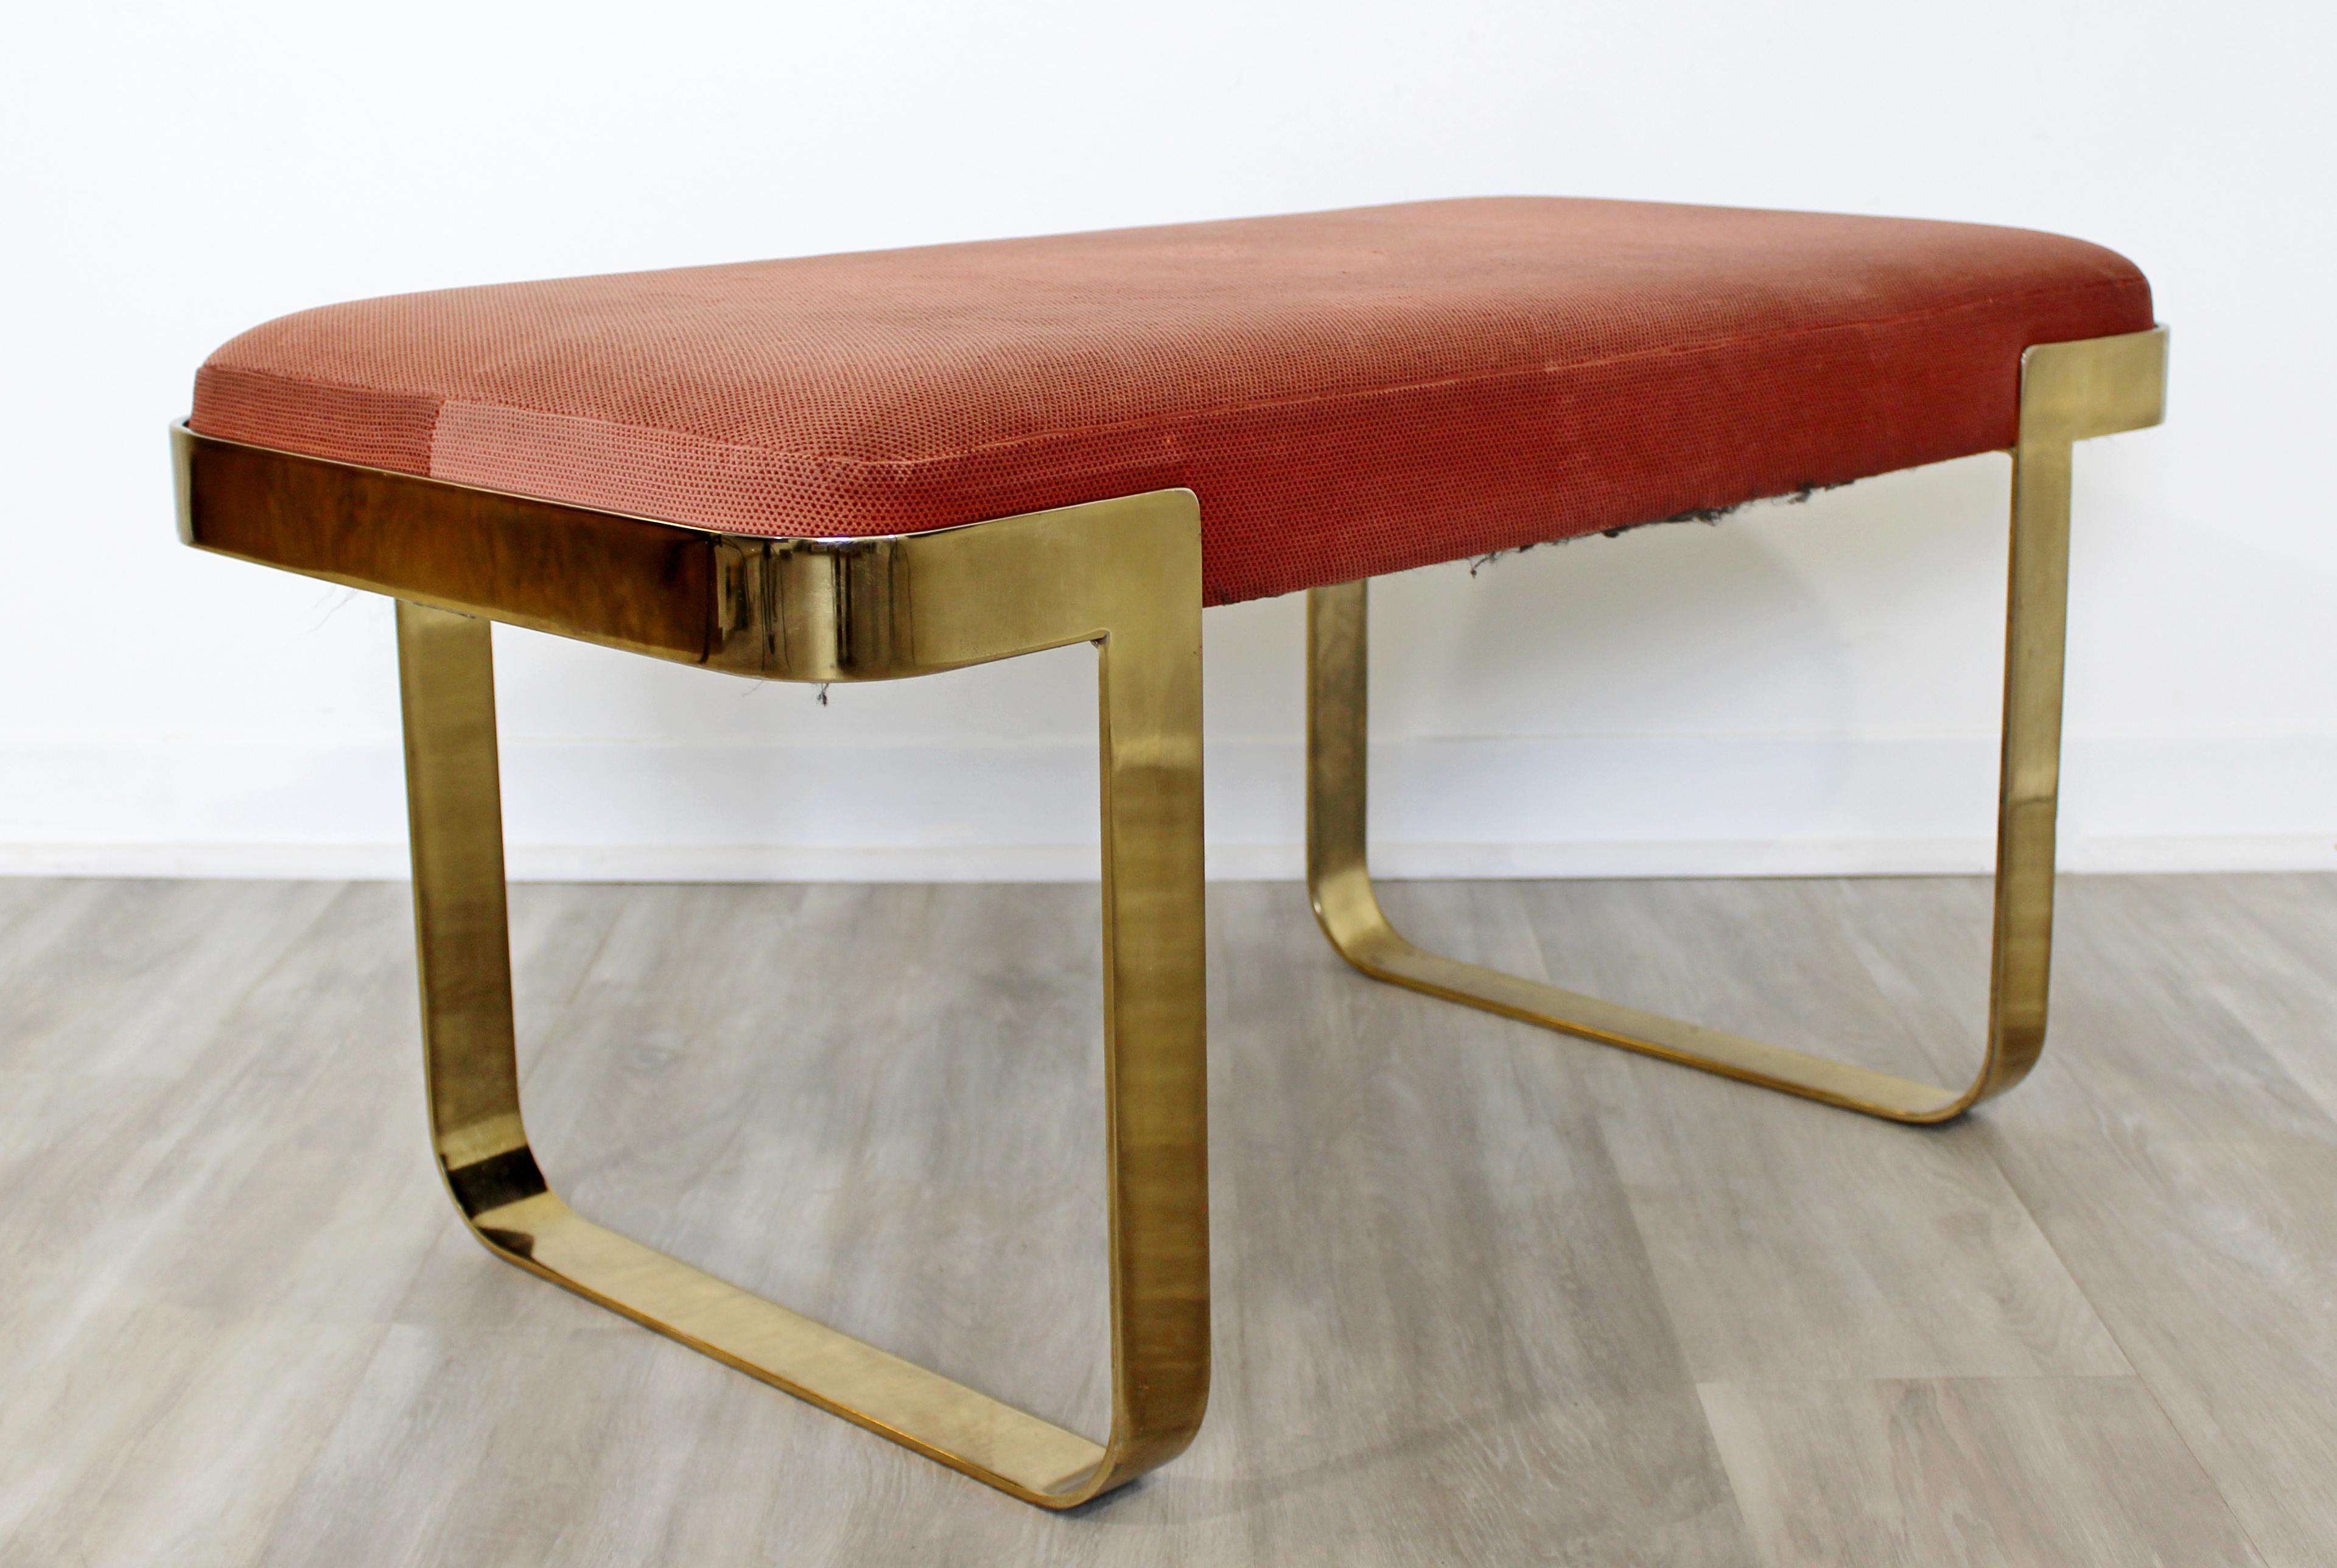 Late 20th Century Contemporary Modern Sculptural Flat Curved Brass Bench Seat Pace DIA Style 1980s